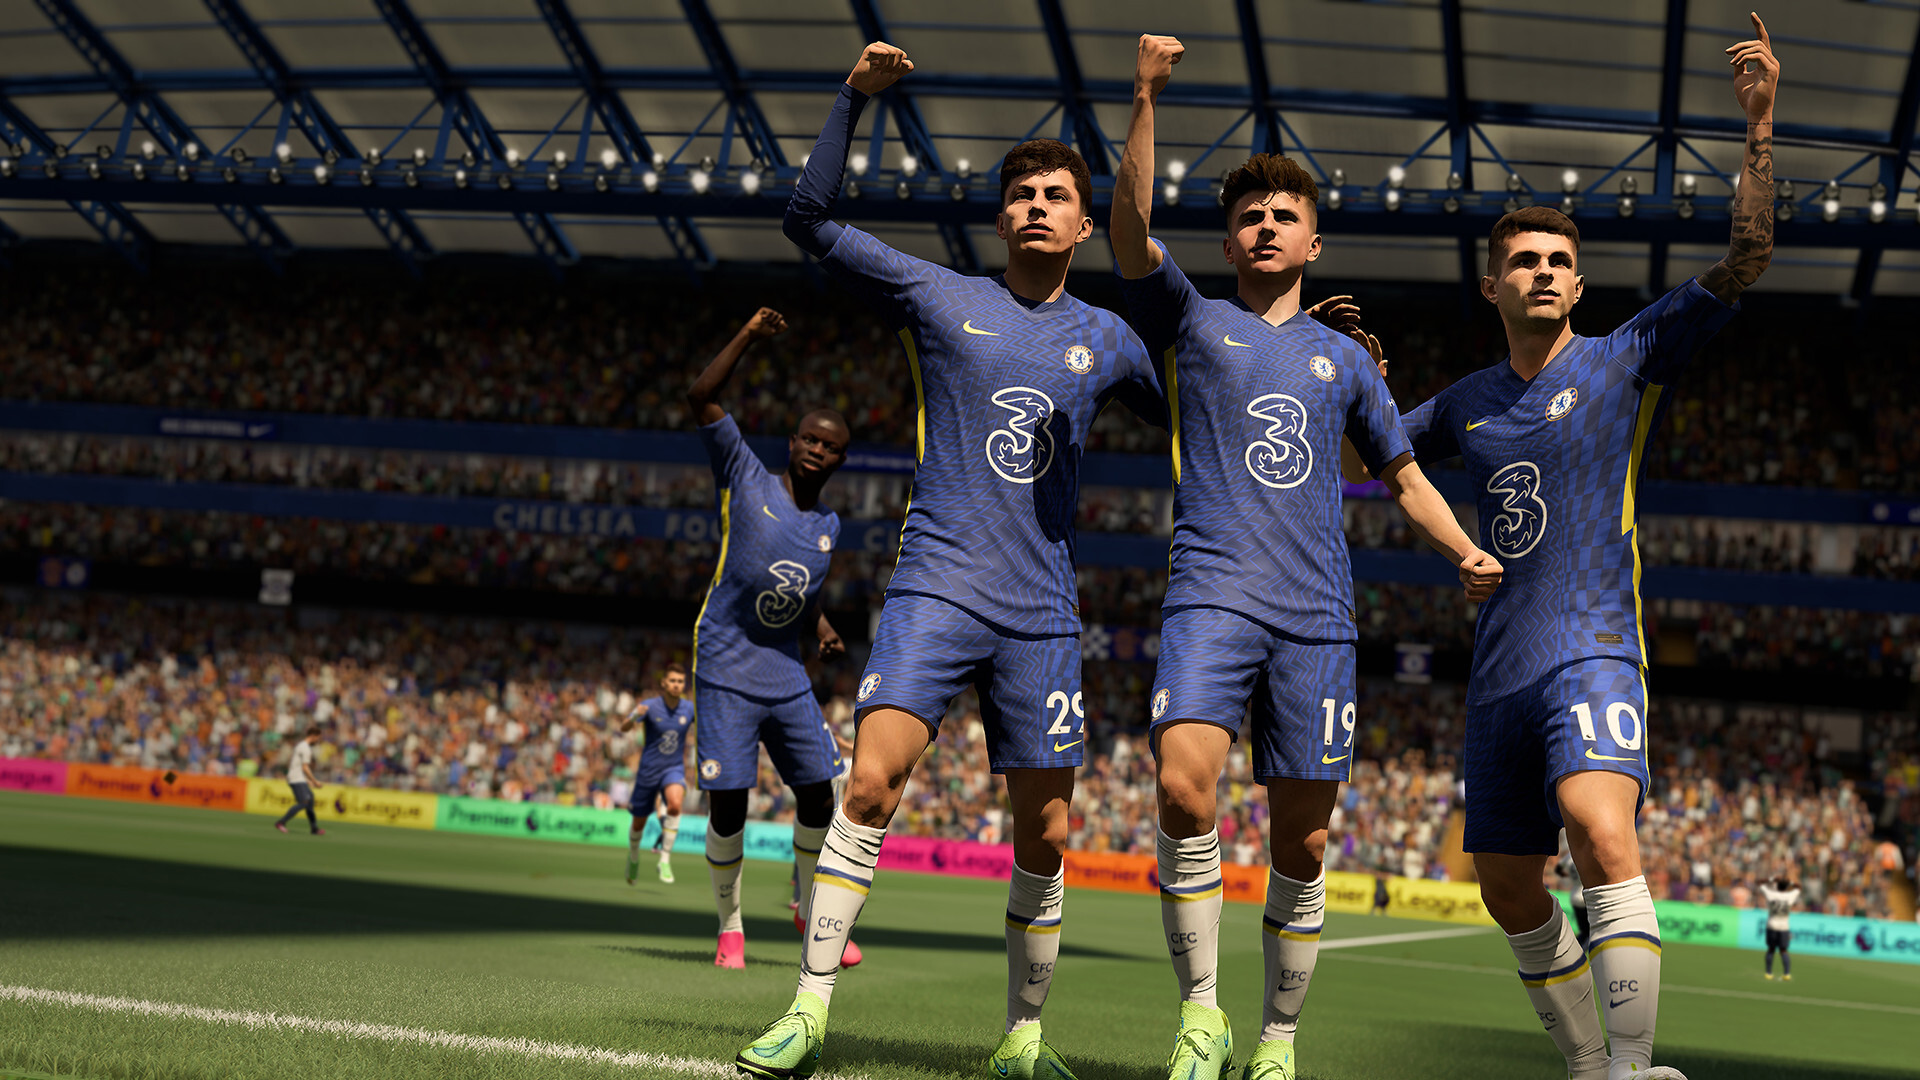 Buy FIFA 22  Ultimate Edition (PC) - Steam Key - EUROPE - Cheap